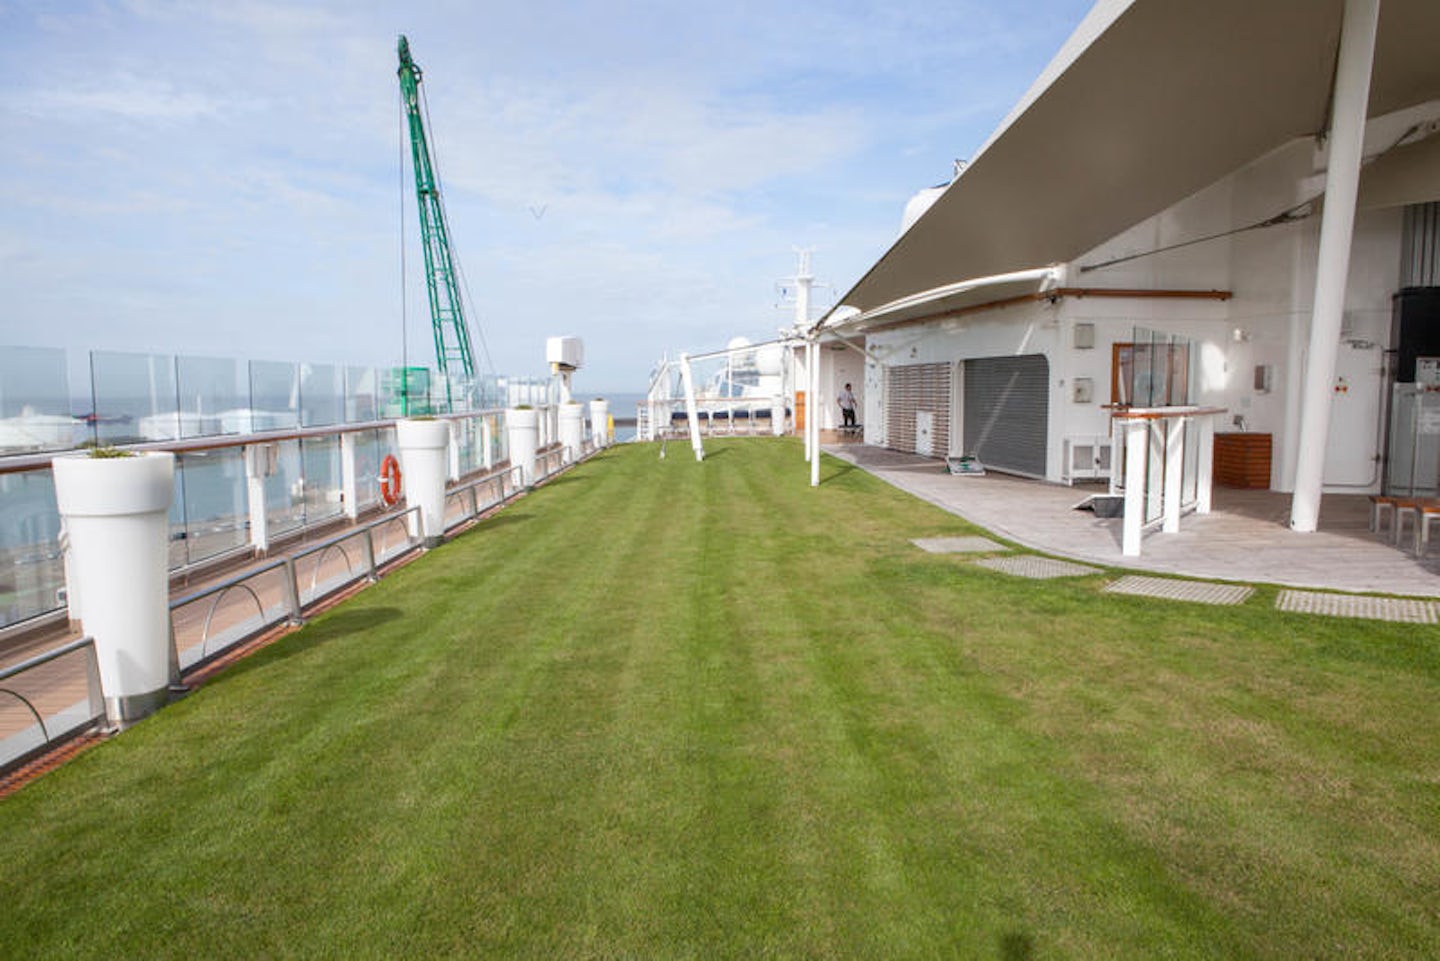 The Lawn Club on Celebrity Eclipse